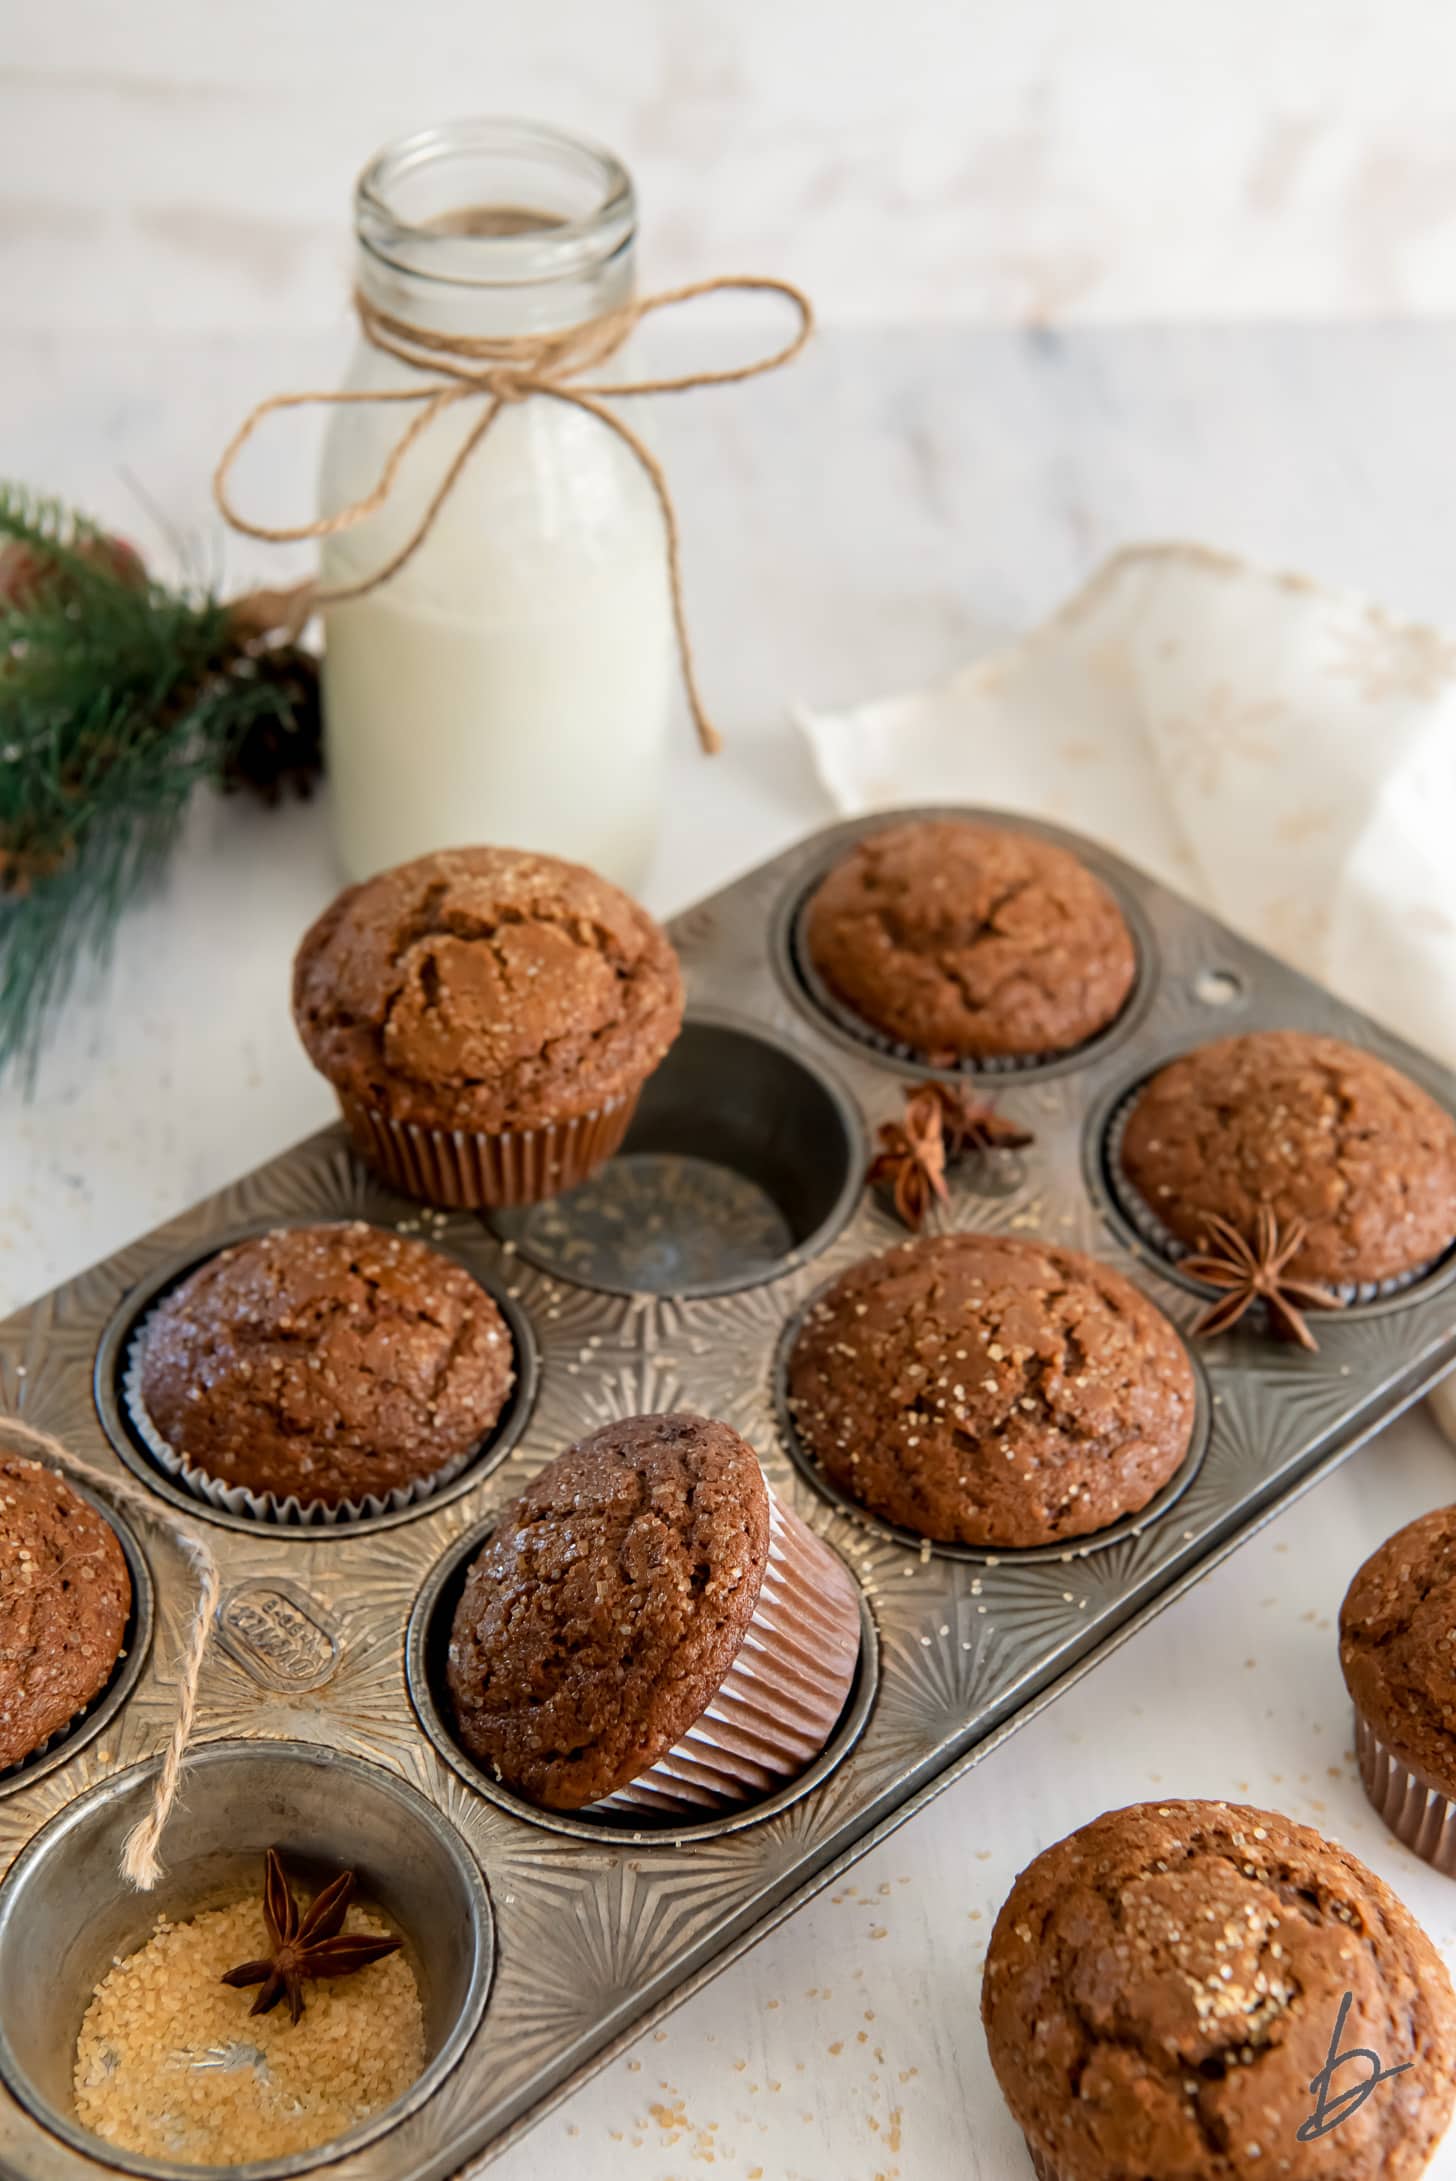 gingerbread muffins in an antique muffin tin in front of glass bottle of milk.